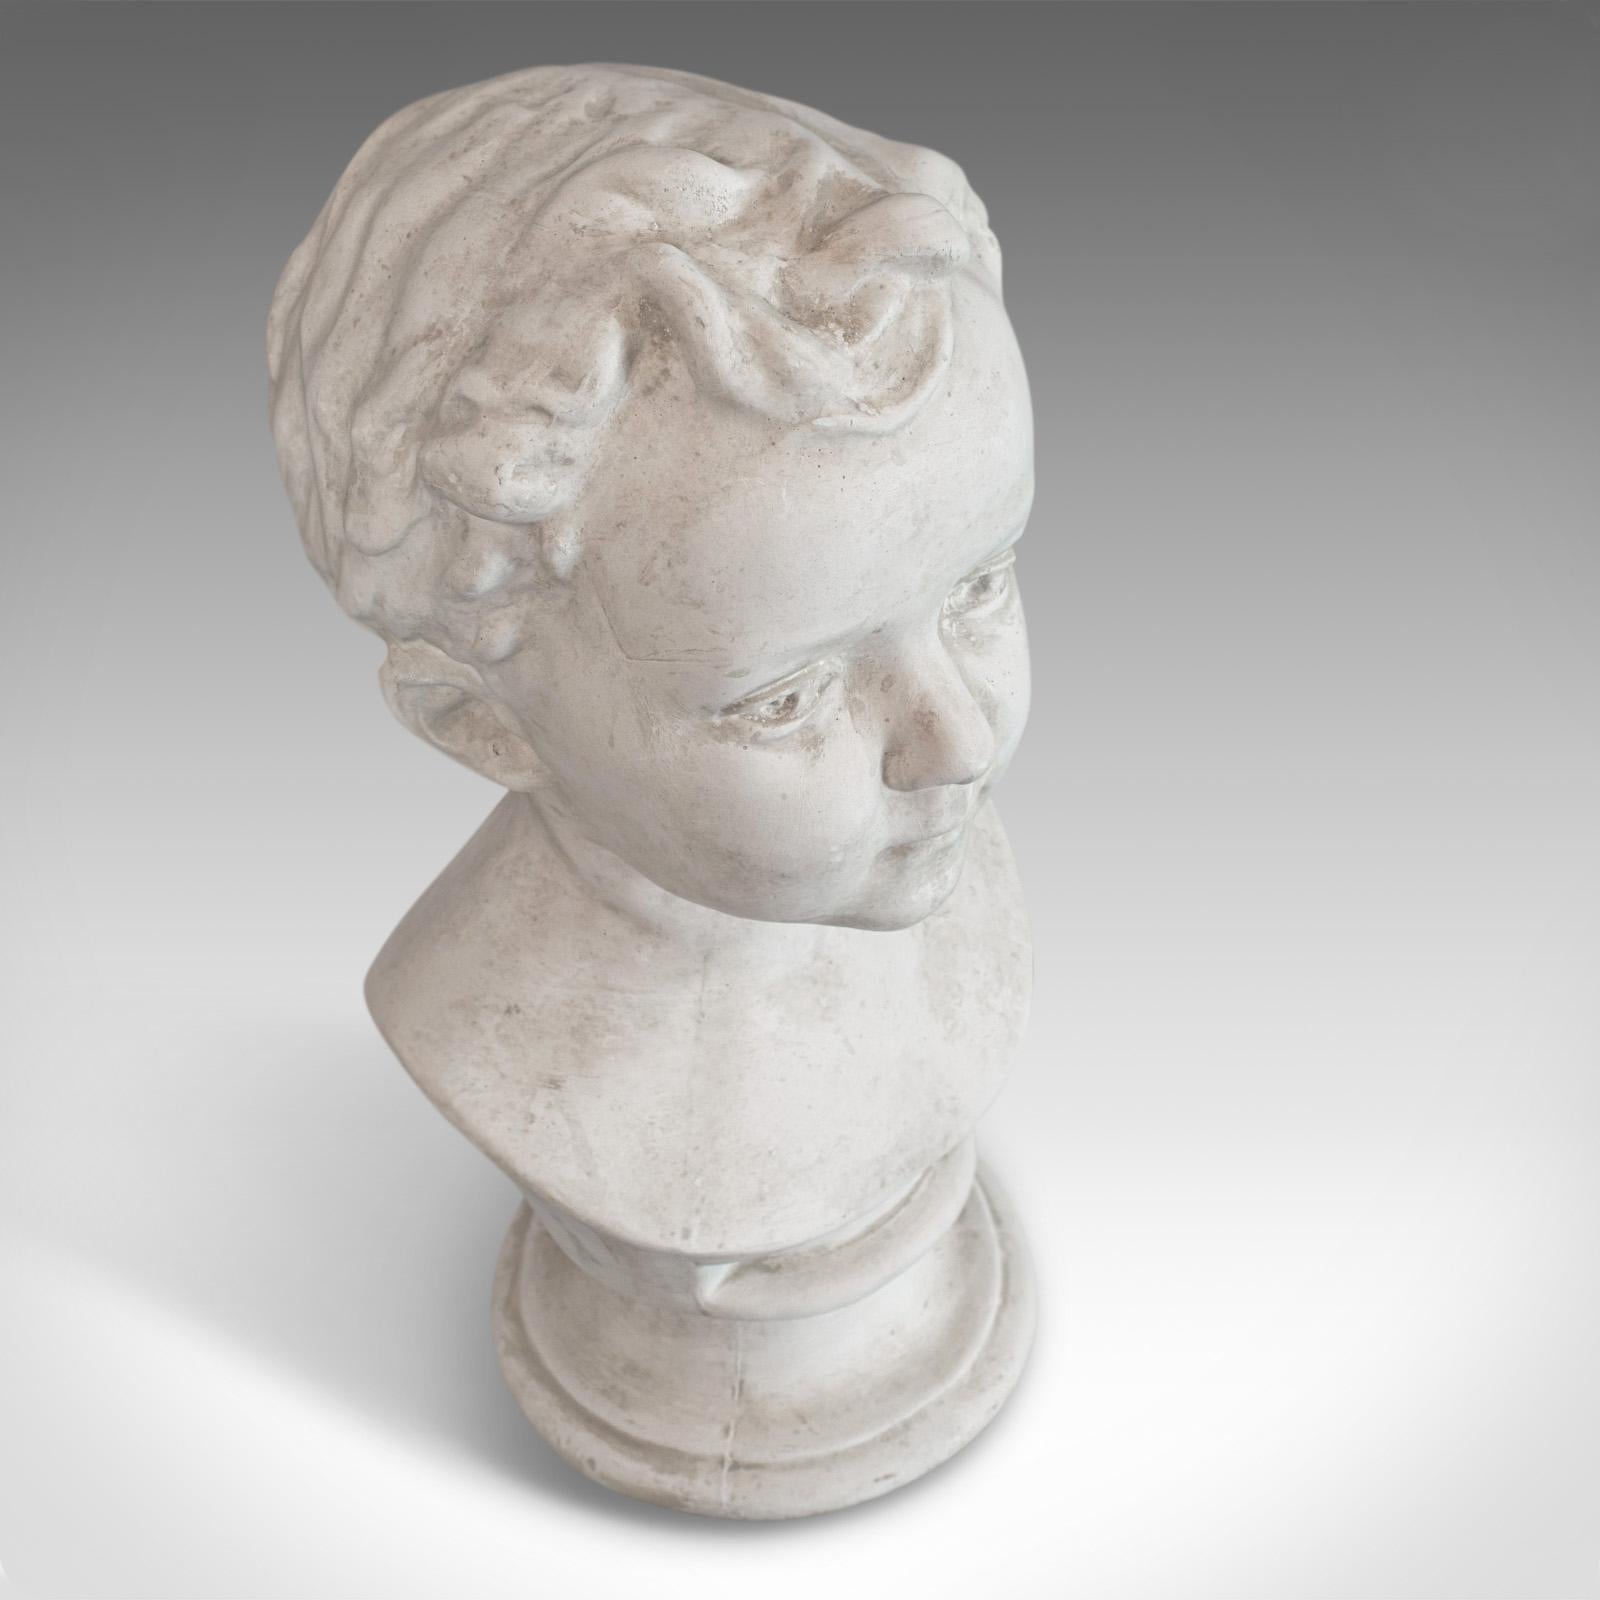 Vintage Child Portrait Bust, English, Plaster, Study, Young Boy, 20th Century For Sale 4